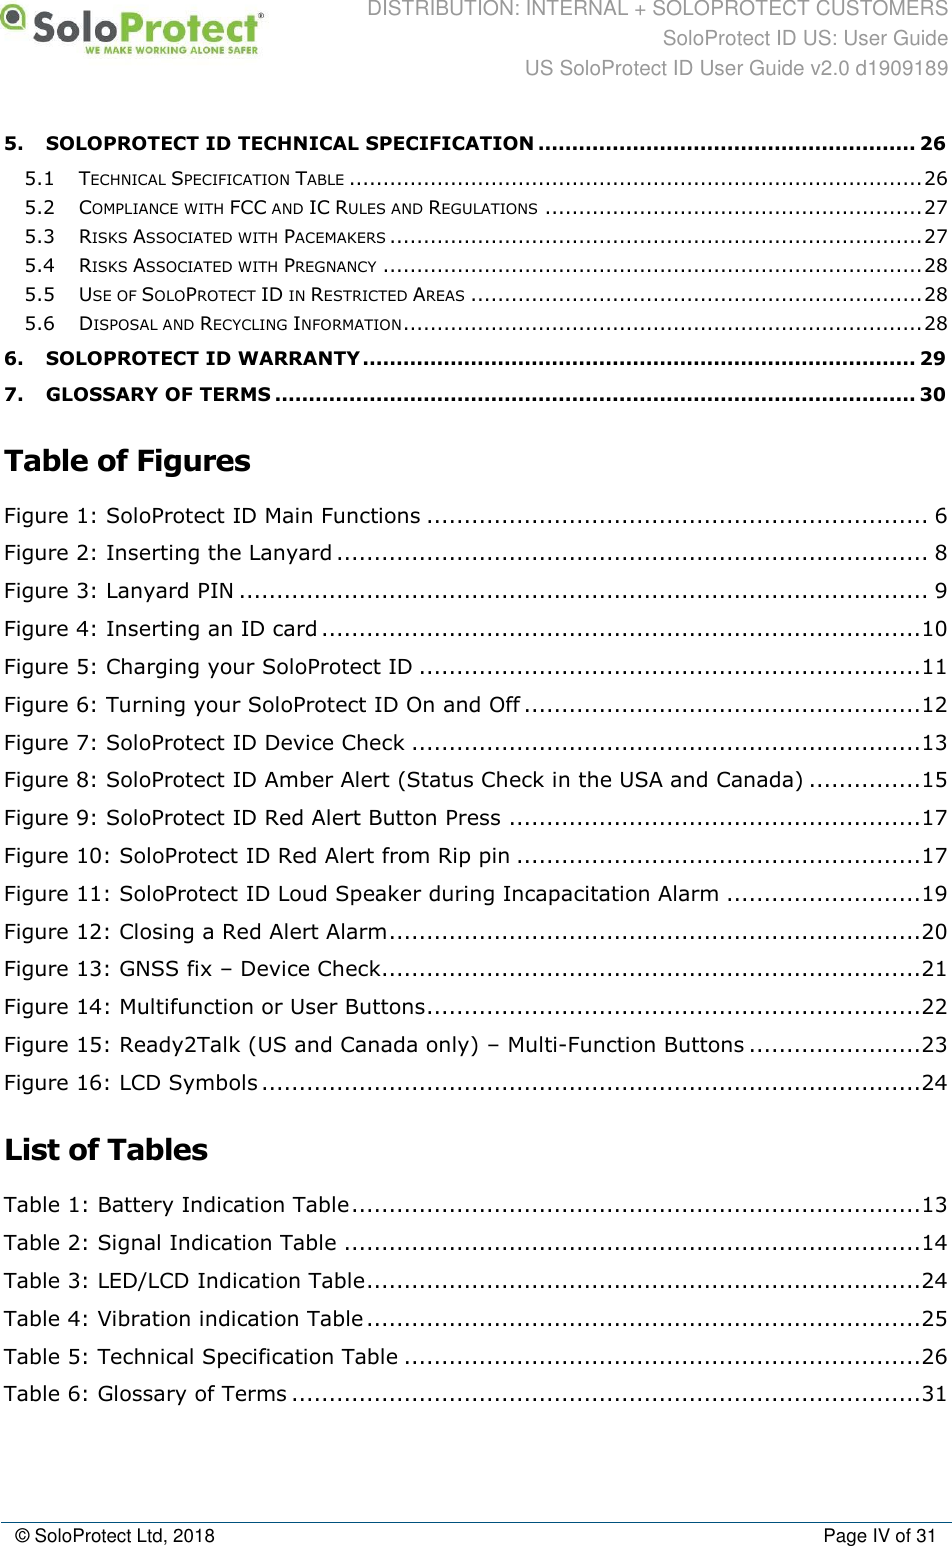 DISTRIBUTION: INTERNAL + SOLOPROTECT CUSTOMERS SoloProtect ID US: User Guide US SoloProtect ID User Guide v2.0 d1909189  © SoloProtect Ltd, 2018  Page IV of 31 5. SOLOPROTECT ID TECHNICAL SPECIFICATION ........................................................ 26 5.1 TECHNICAL SPECIFICATION TABLE ..................................................................................... 26 5.2 COMPLIANCE WITH FCC AND IC RULES AND REGULATIONS ........................................................ 27 5.3 RISKS ASSOCIATED WITH PACEMAKERS ............................................................................... 27 5.4 RISKS ASSOCIATED WITH PREGNANCY ................................................................................ 28 5.5 USE OF SOLOPROTECT ID IN RESTRICTED AREAS ................................................................... 28 5.6 DISPOSAL AND RECYCLING INFORMATION ............................................................................. 28 6. SOLOPROTECT ID WARRANTY .................................................................................. 29 7. GLOSSARY OF TERMS ............................................................................................... 30  Table of Figures Figure 1: SoloProtect ID Main Functions ................................................................... 6 Figure 2: Inserting the Lanyard ............................................................................... 8 Figure 3: Lanyard PIN ............................................................................................ 9 Figure 4: Inserting an ID card ................................................................................ 10 Figure 5: Charging your SoloProtect ID ................................................................... 11 Figure 6: Turning your SoloProtect ID On and Off ..................................................... 12 Figure 7: SoloProtect ID Device Check .................................................................... 13 Figure 8: SoloProtect ID Amber Alert (Status Check in the USA and Canada) ............... 15 Figure 9: SoloProtect ID Red Alert Button Press ....................................................... 17 Figure 10: SoloProtect ID Red Alert from Rip pin ...................................................... 17 Figure 11: SoloProtect ID Loud Speaker during Incapacitation Alarm .......................... 19 Figure 12: Closing a Red Alert Alarm ....................................................................... 20 Figure 13: GNSS fix – Device Check........................................................................ 21 Figure 14: Multifunction or User Buttons .................................................................. 22 Figure 15: Ready2Talk (US and Canada only) – Multi-Function Buttons ....................... 23 Figure 16: LCD Symbols ........................................................................................ 24  List of Tables Table 1: Battery Indication Table ............................................................................ 13 Table 2: Signal Indication Table ............................................................................. 14 Table 3: LED/LCD Indication Table .......................................................................... 24 Table 4: Vibration indication Table .......................................................................... 25 Table 5: Technical Specification Table ..................................................................... 26 Table 6: Glossary of Terms .................................................................................... 31 